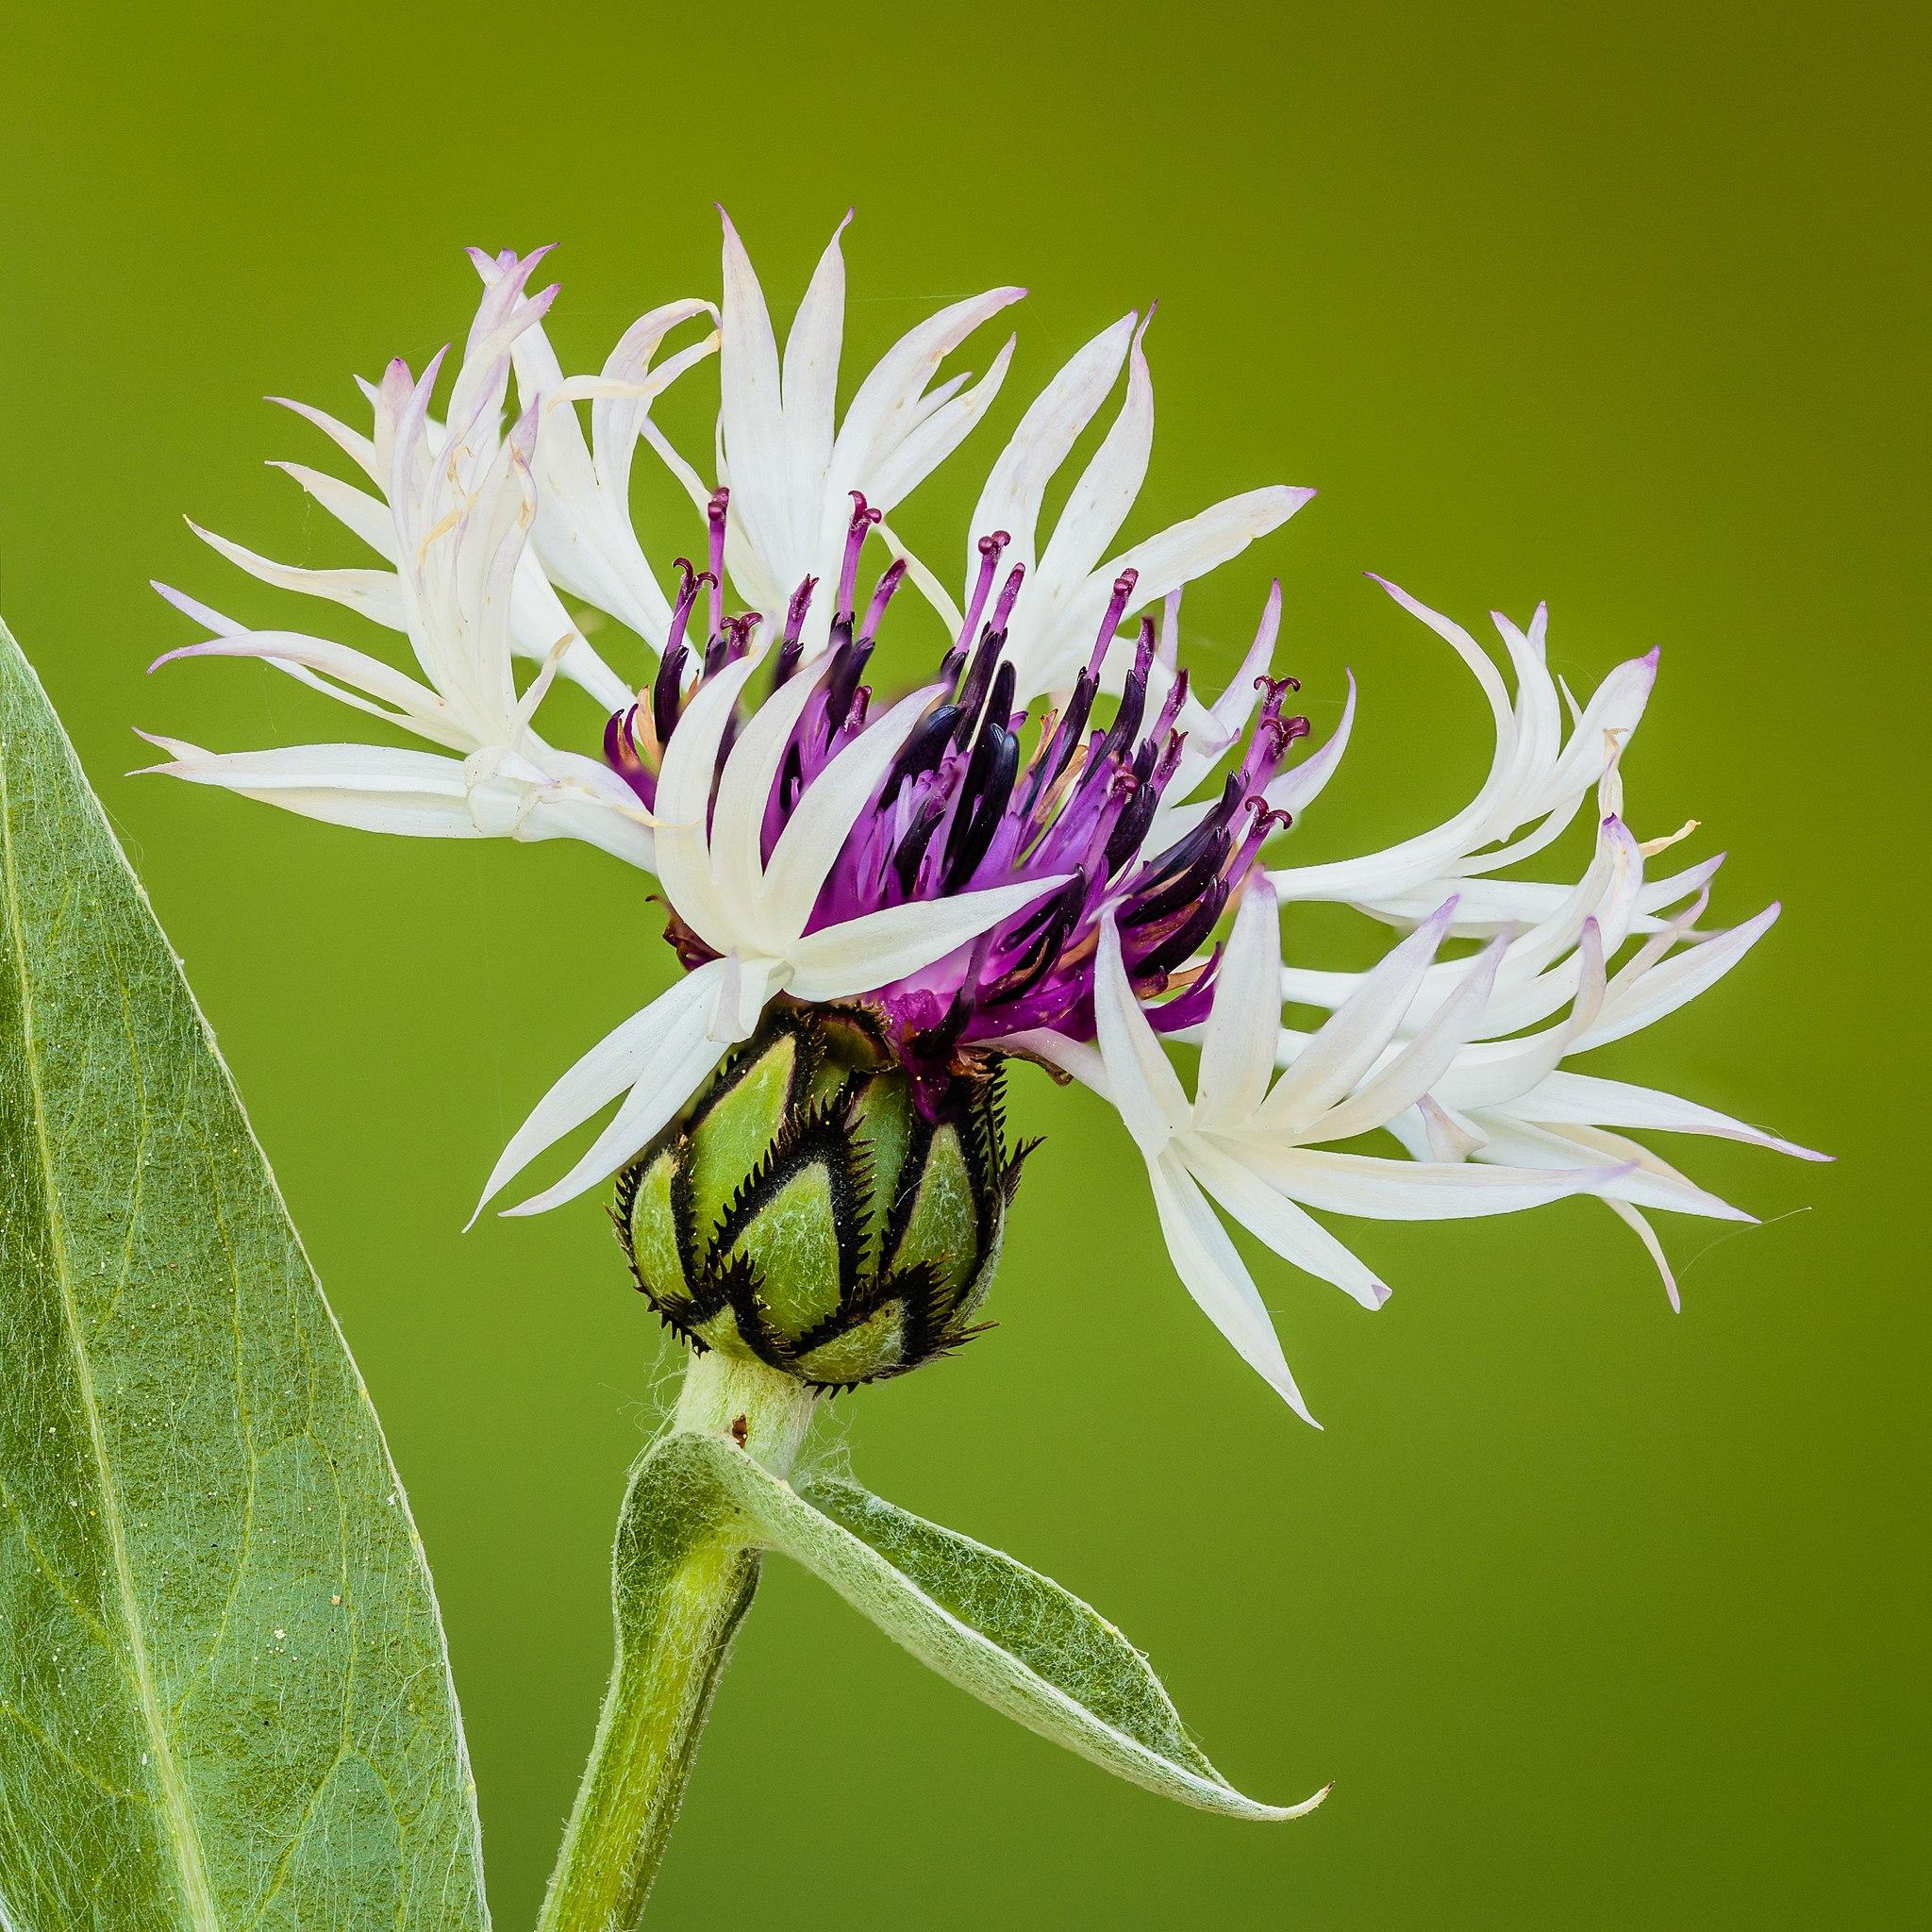 Purple-white flower with purple center, stamen, dark-purple stamen, green-black sepal, white hair and blades, lime-green stems and leaves, yellow midrib and veins.